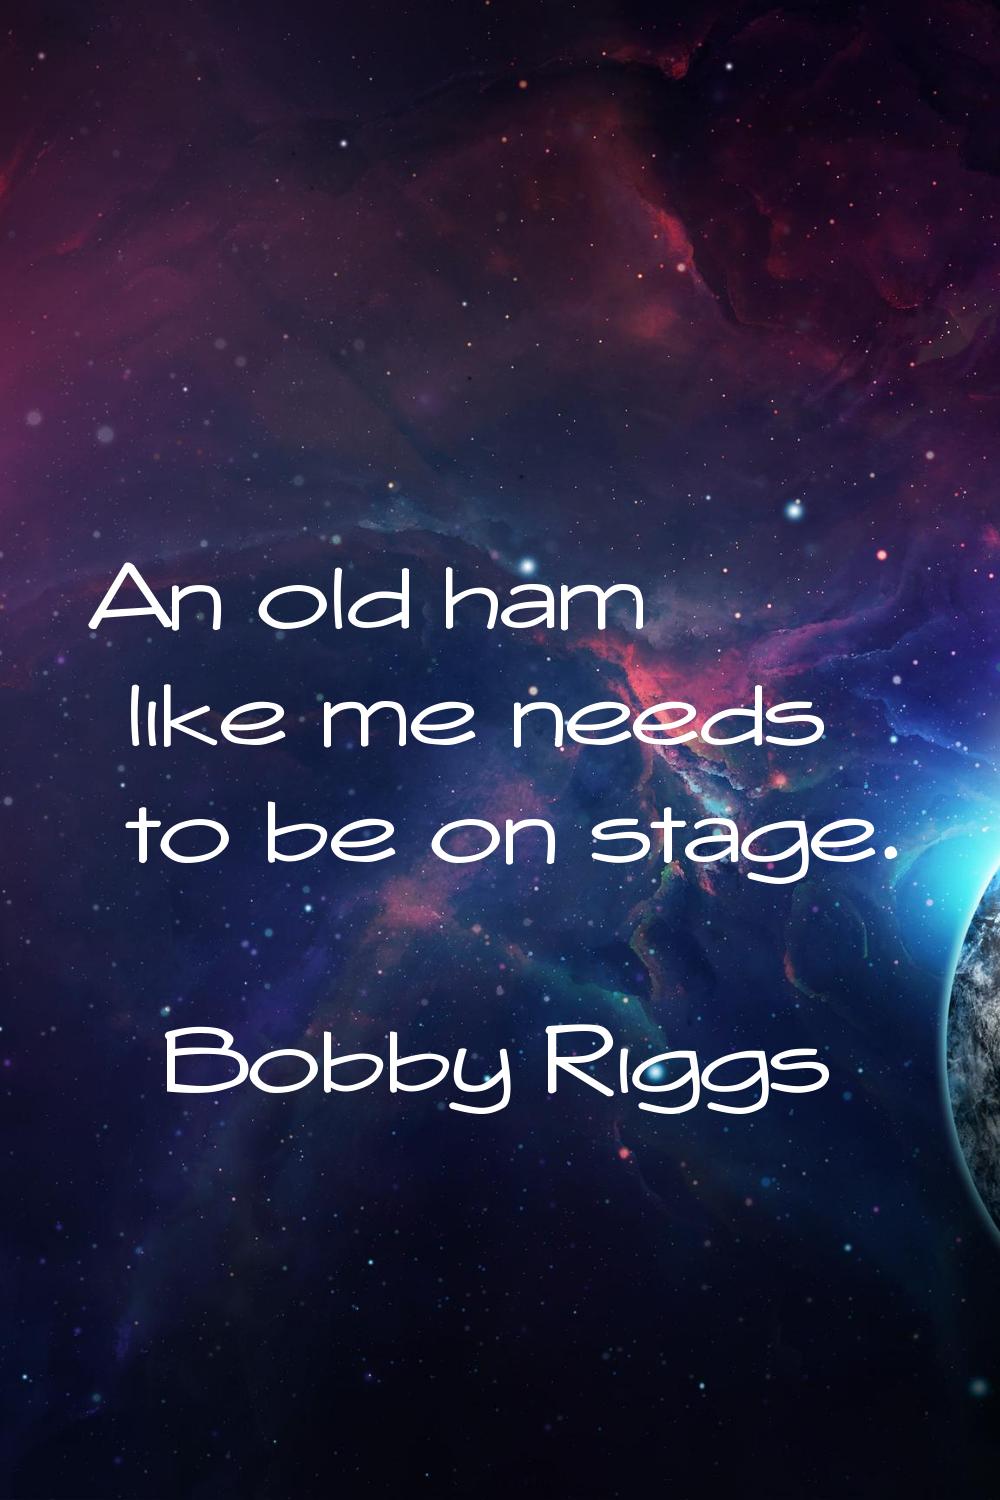 An old ham like me needs to be on stage.